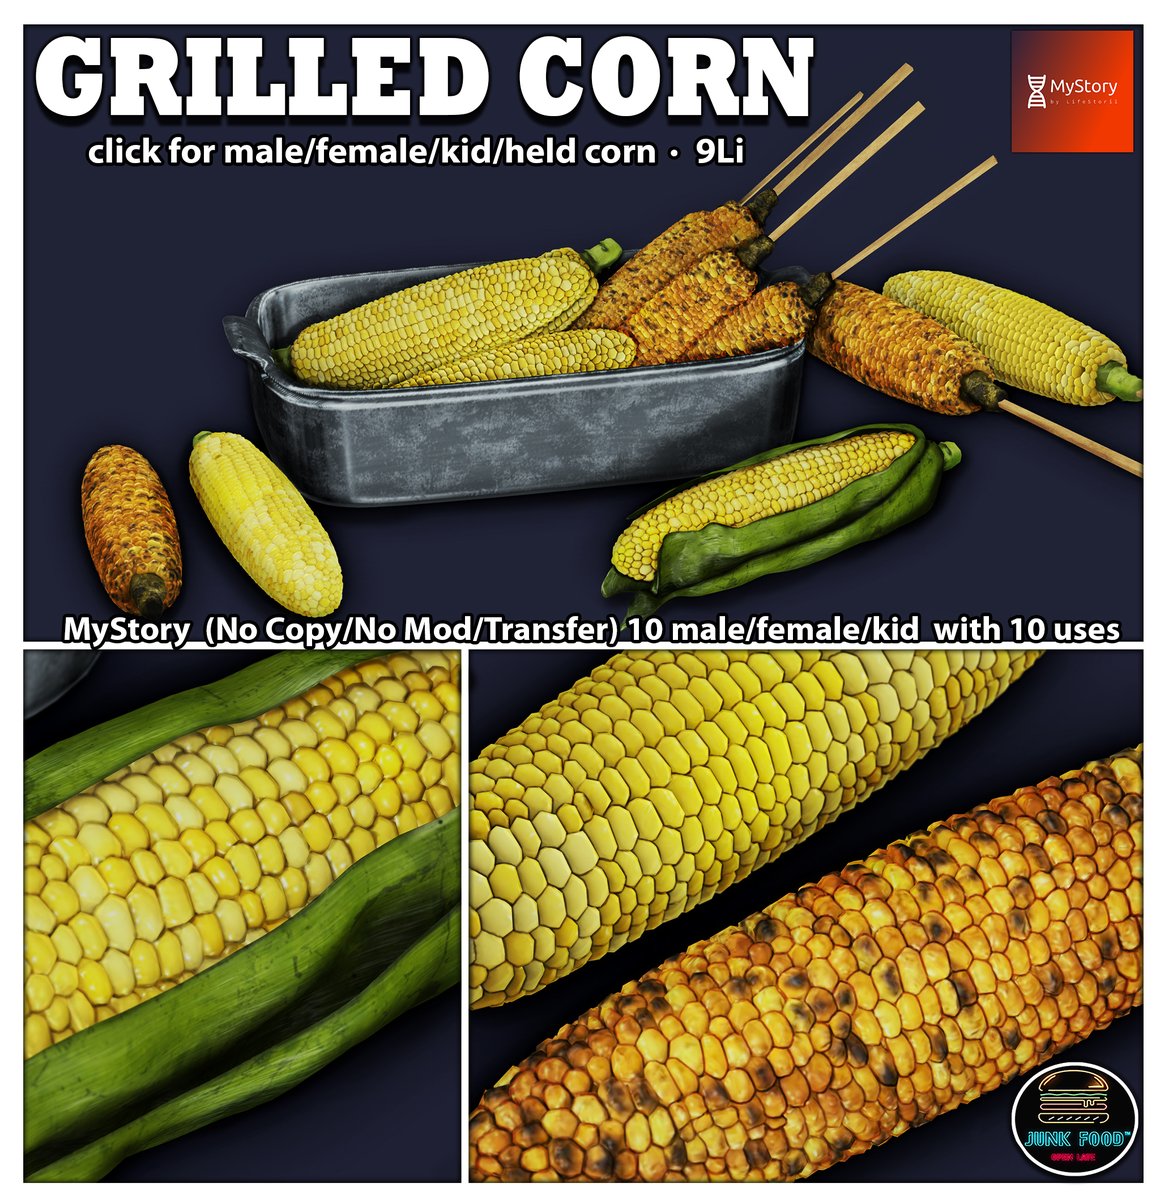 Grilled Corn Set 9li Tray and 1-2 li corn cobs. Grilled and regular cobs included. Click for male/female/kid/held corn cobs to enjoy. MyStory Version also out, male/female/kid eating with 10 cobs with 10 uses. @ N21
maps.secondlife.com/secondlife/N21… #SecondLife #secondlifeshop #slshop